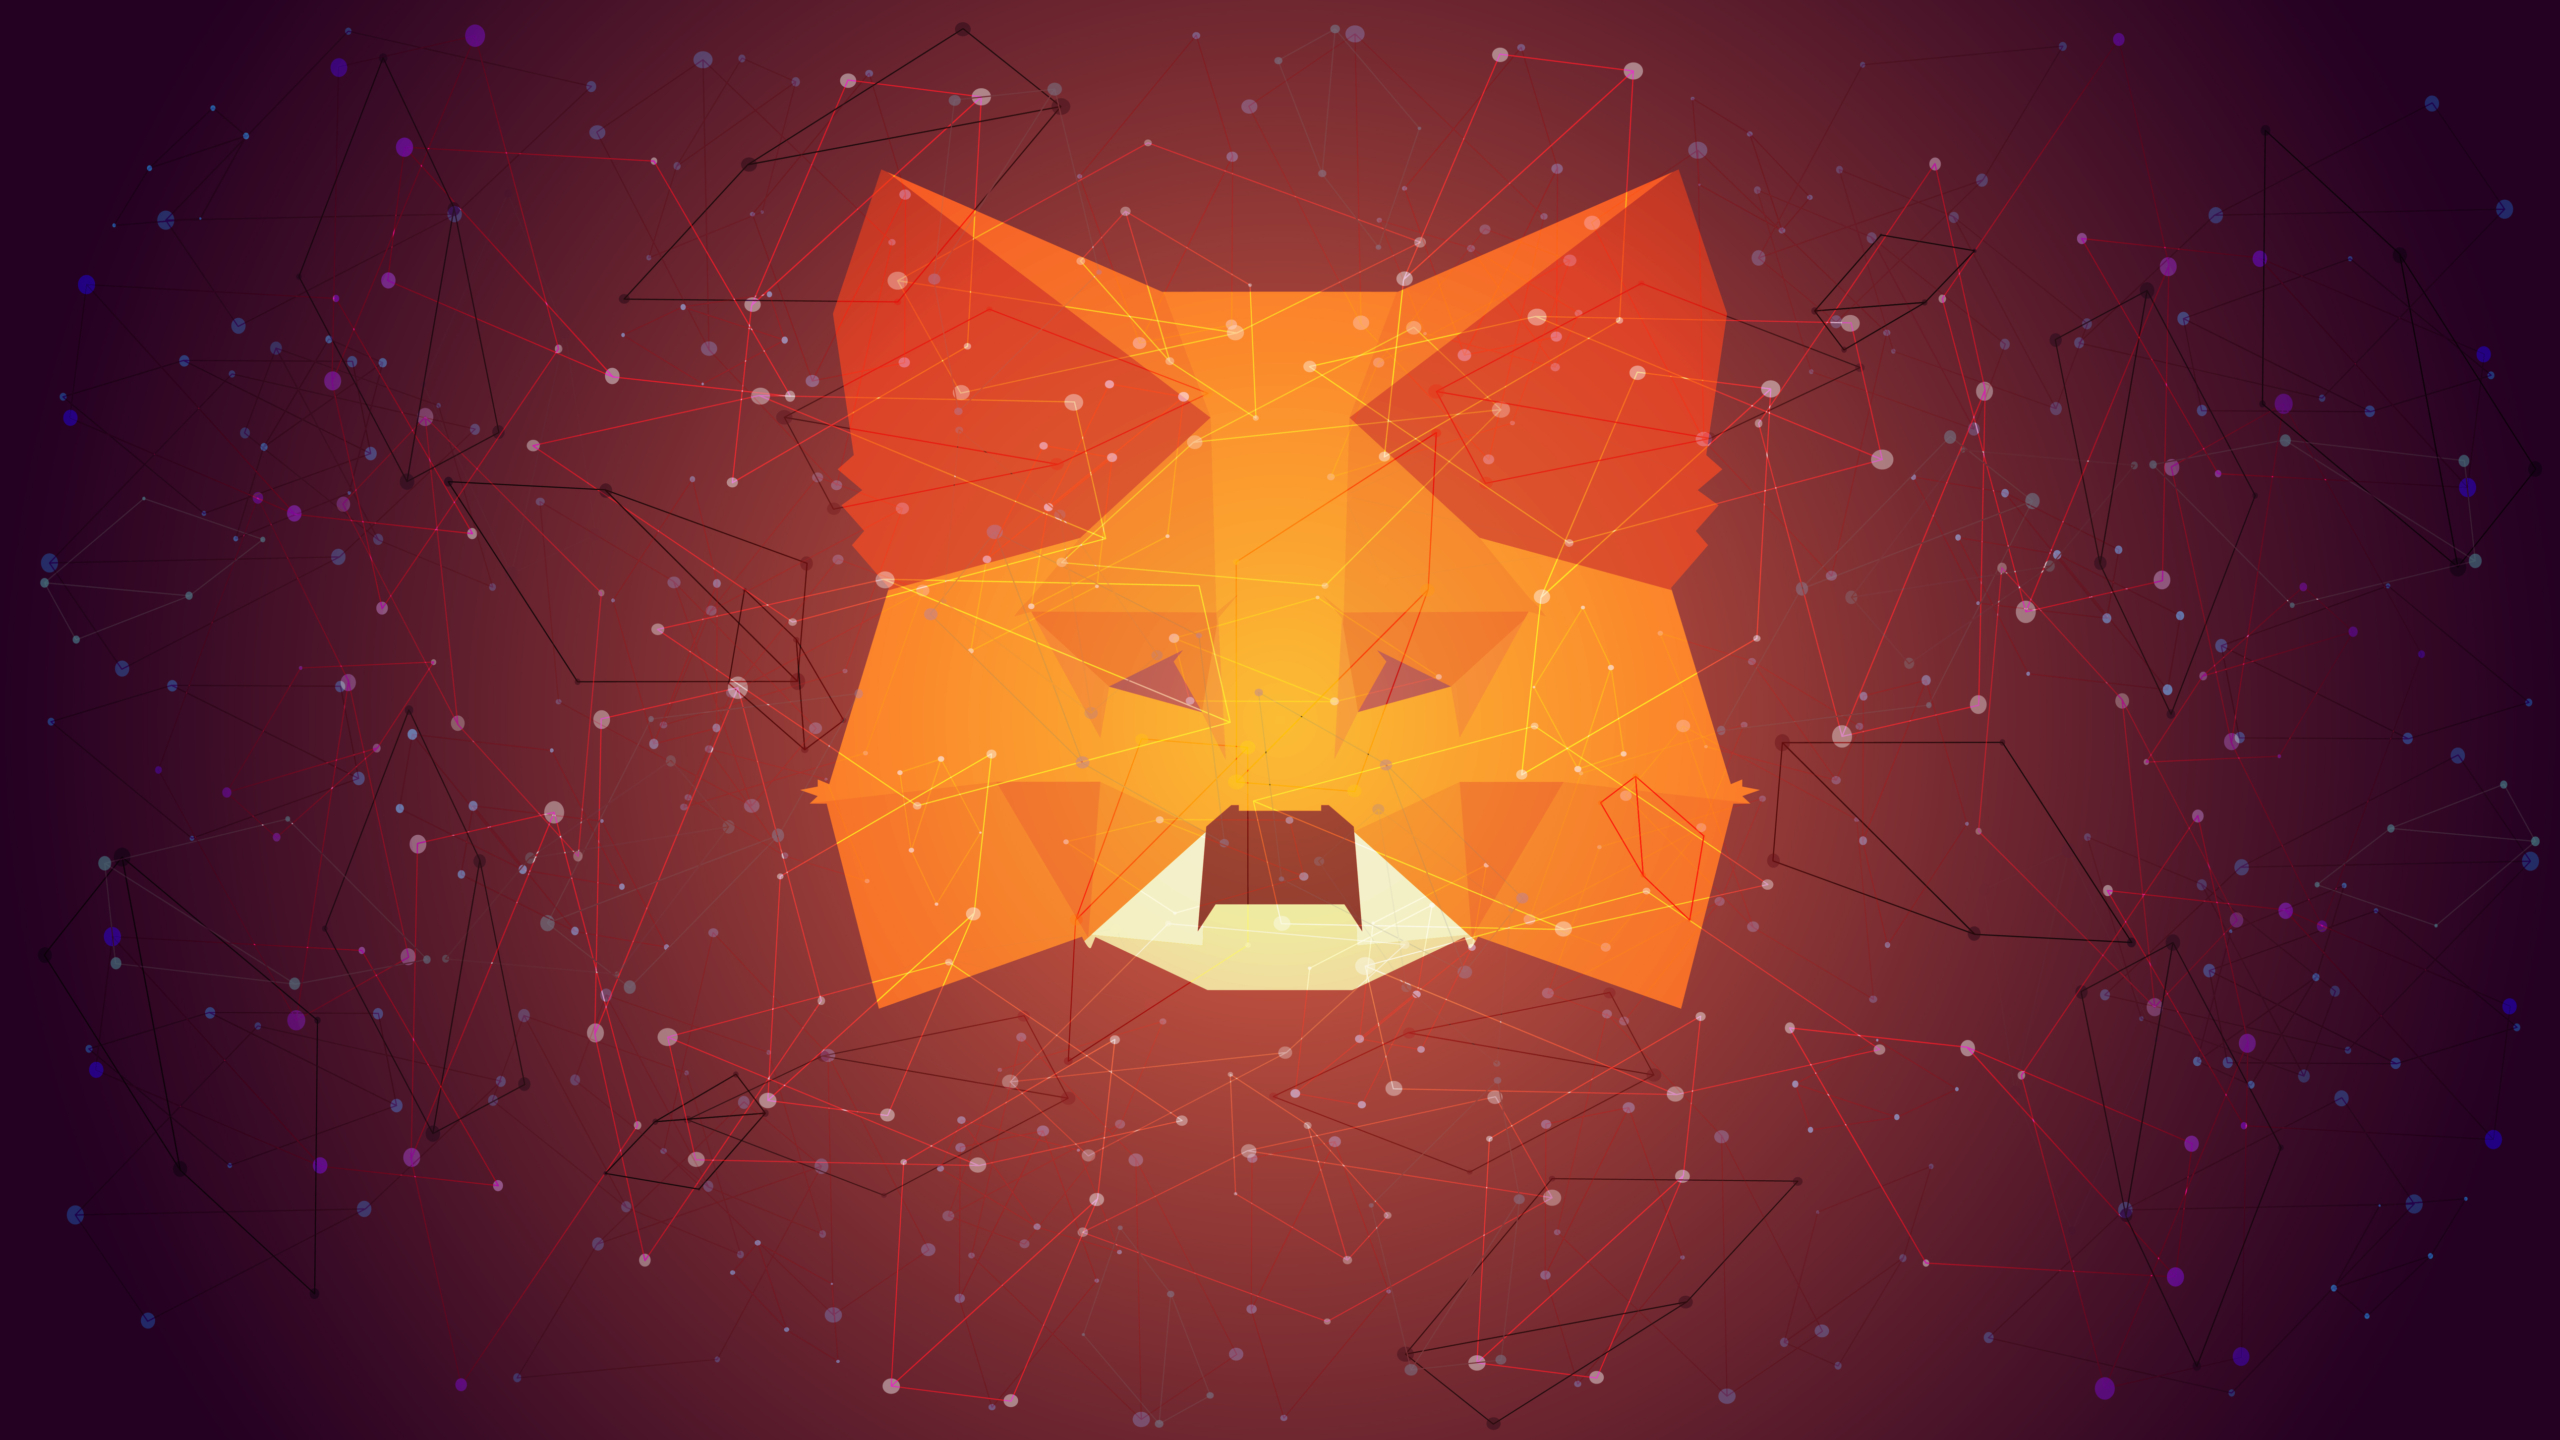 MetaMask logo sign on polygonal wireframe red background. Crypto wallet for Defi, Web3 Dapps and NFTs.